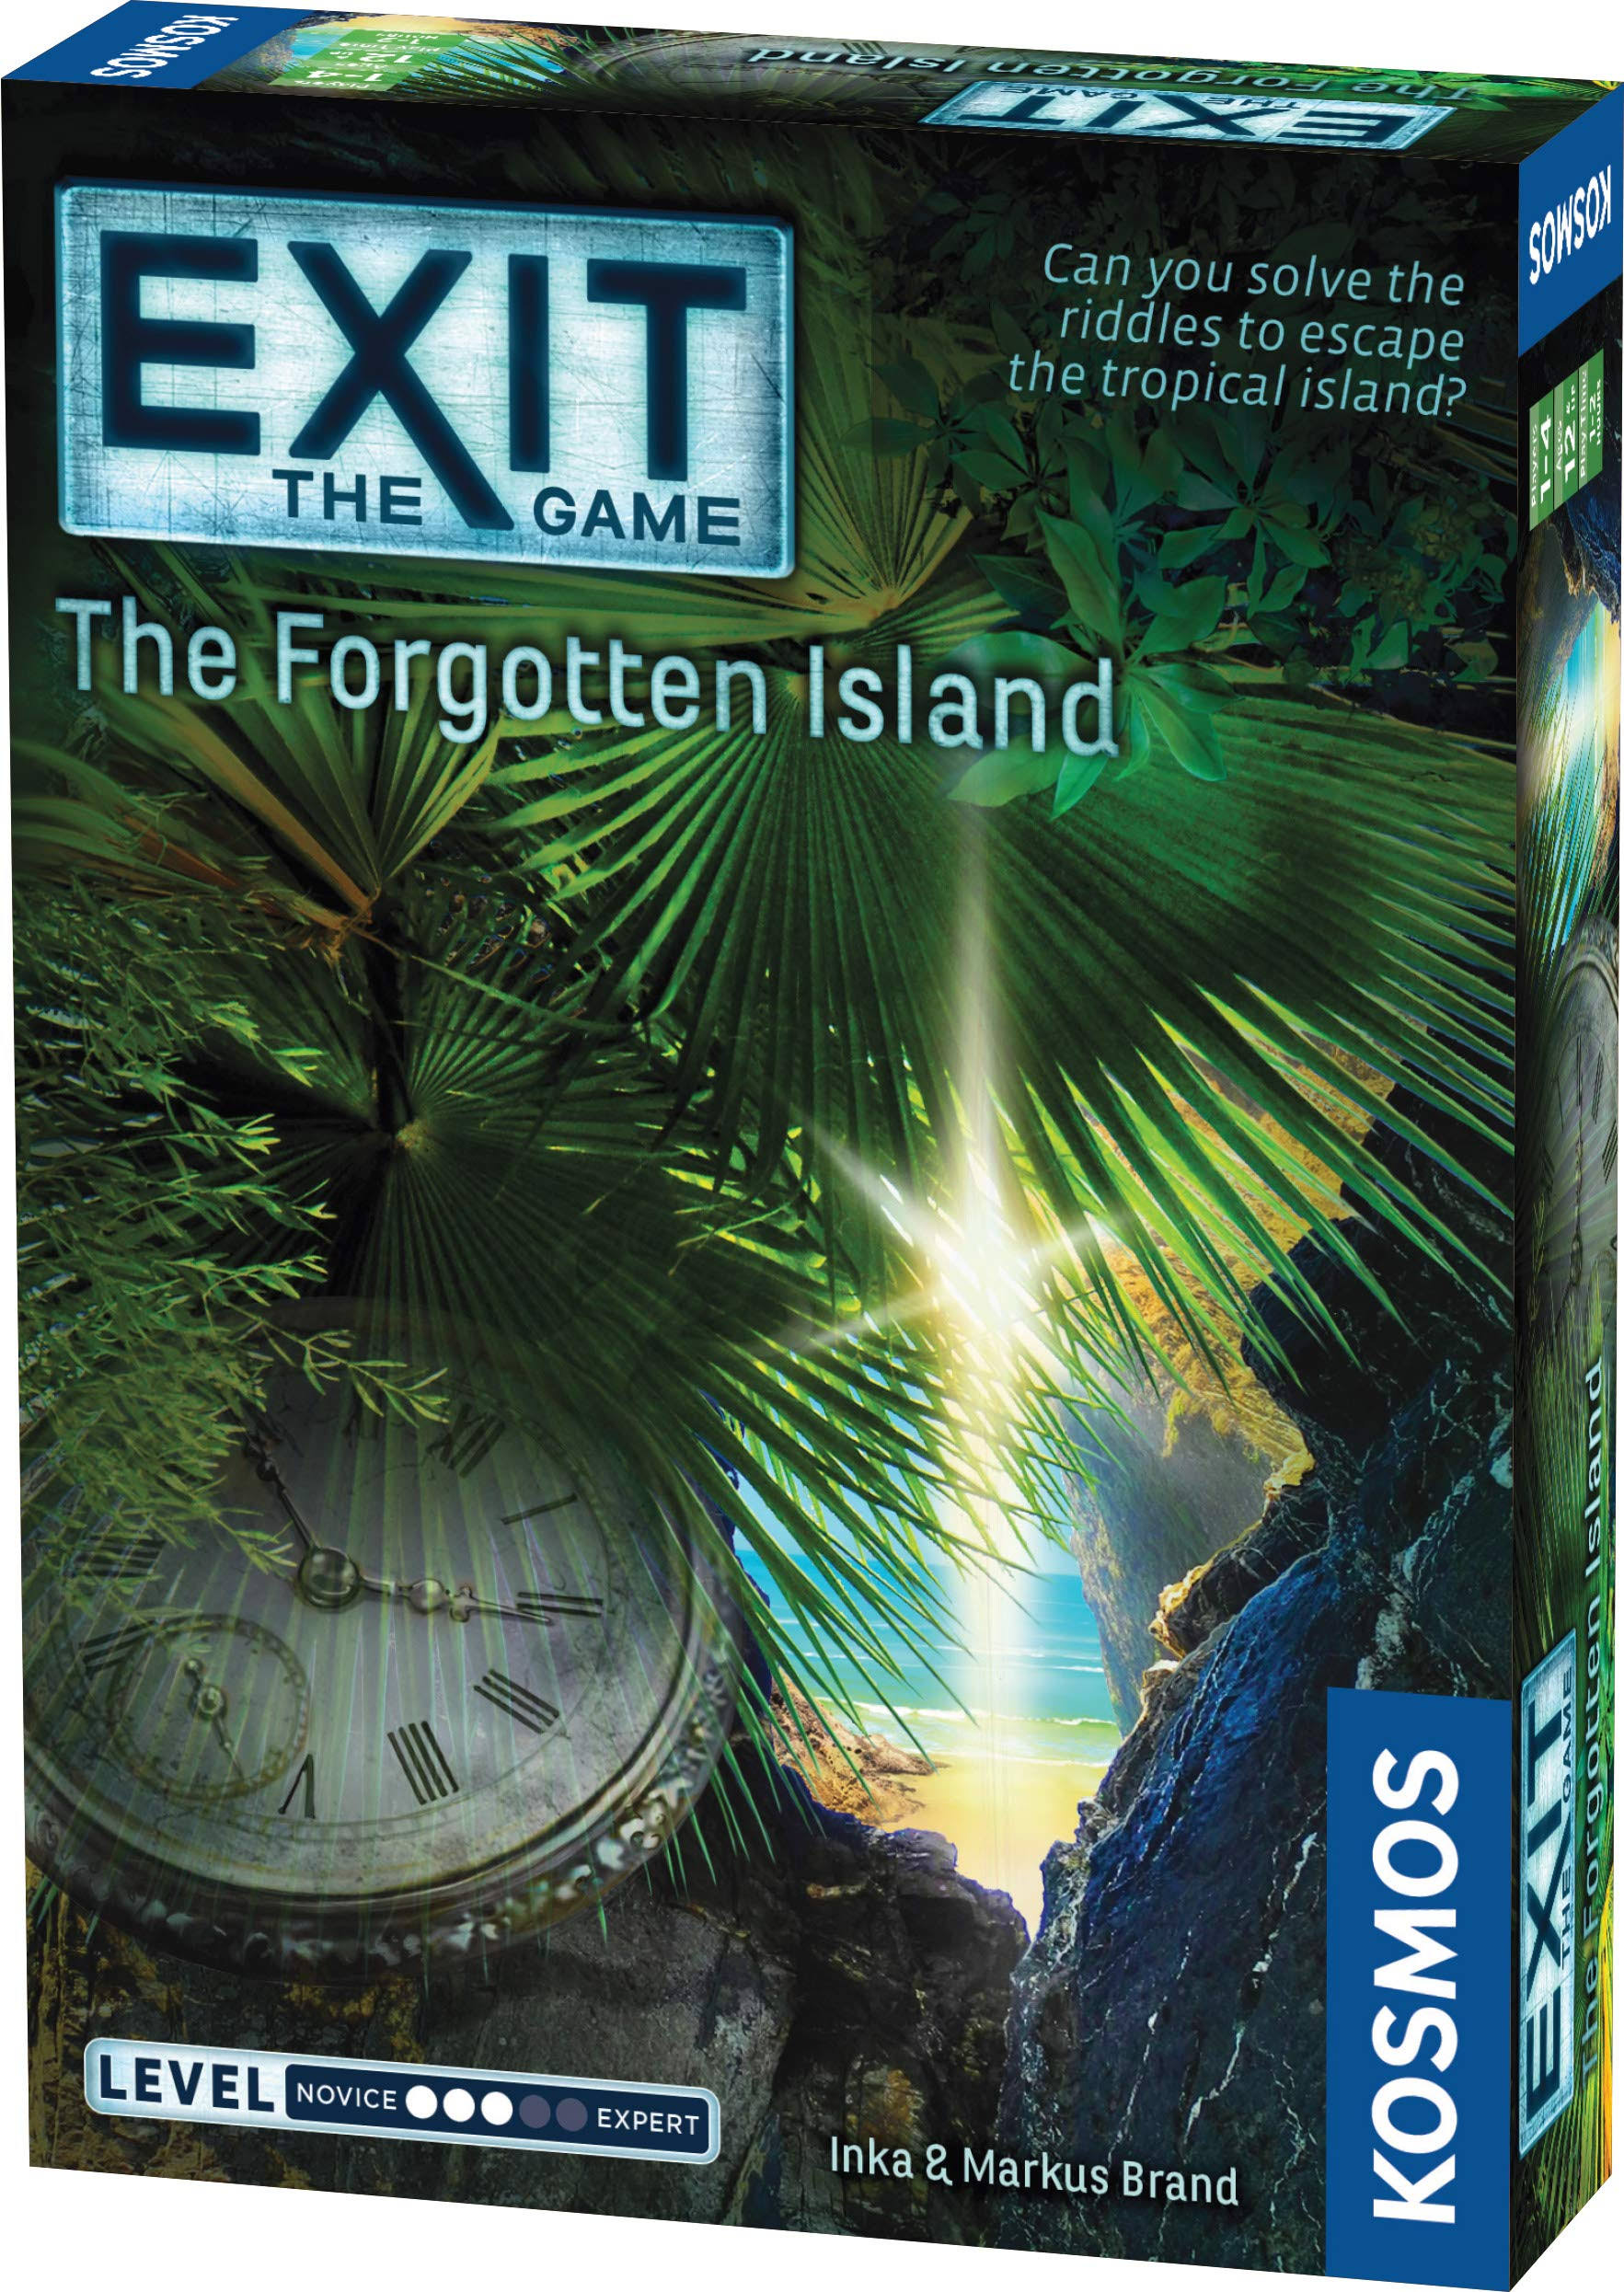 Exit The Game - The Forgotten Island